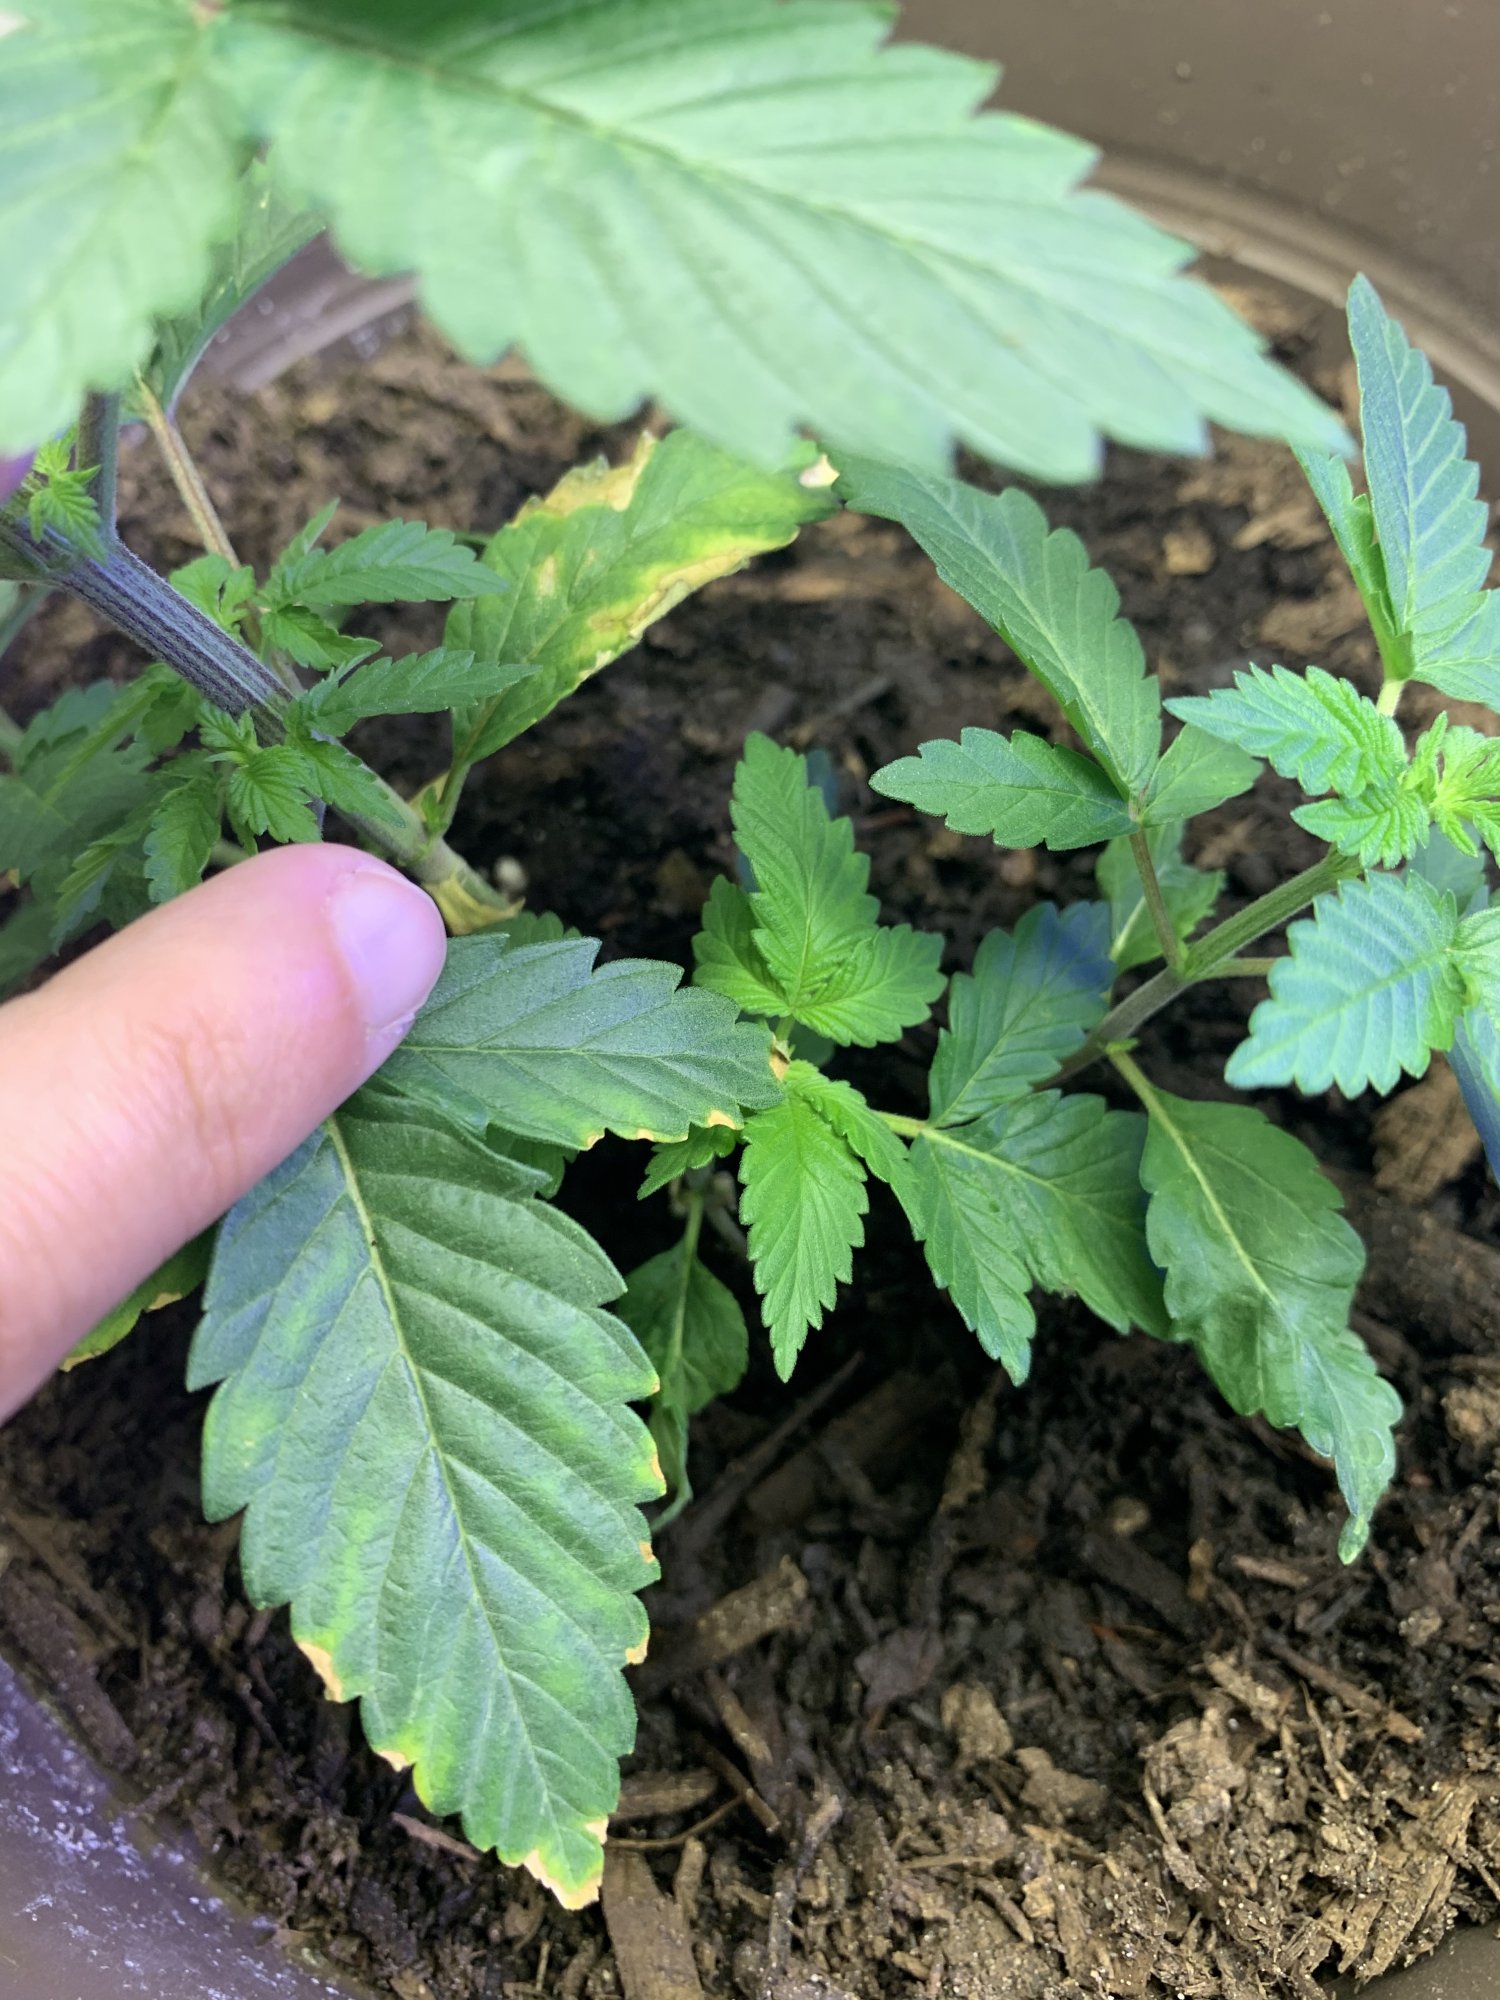 Browningyellowing areas on bottom leaves 4